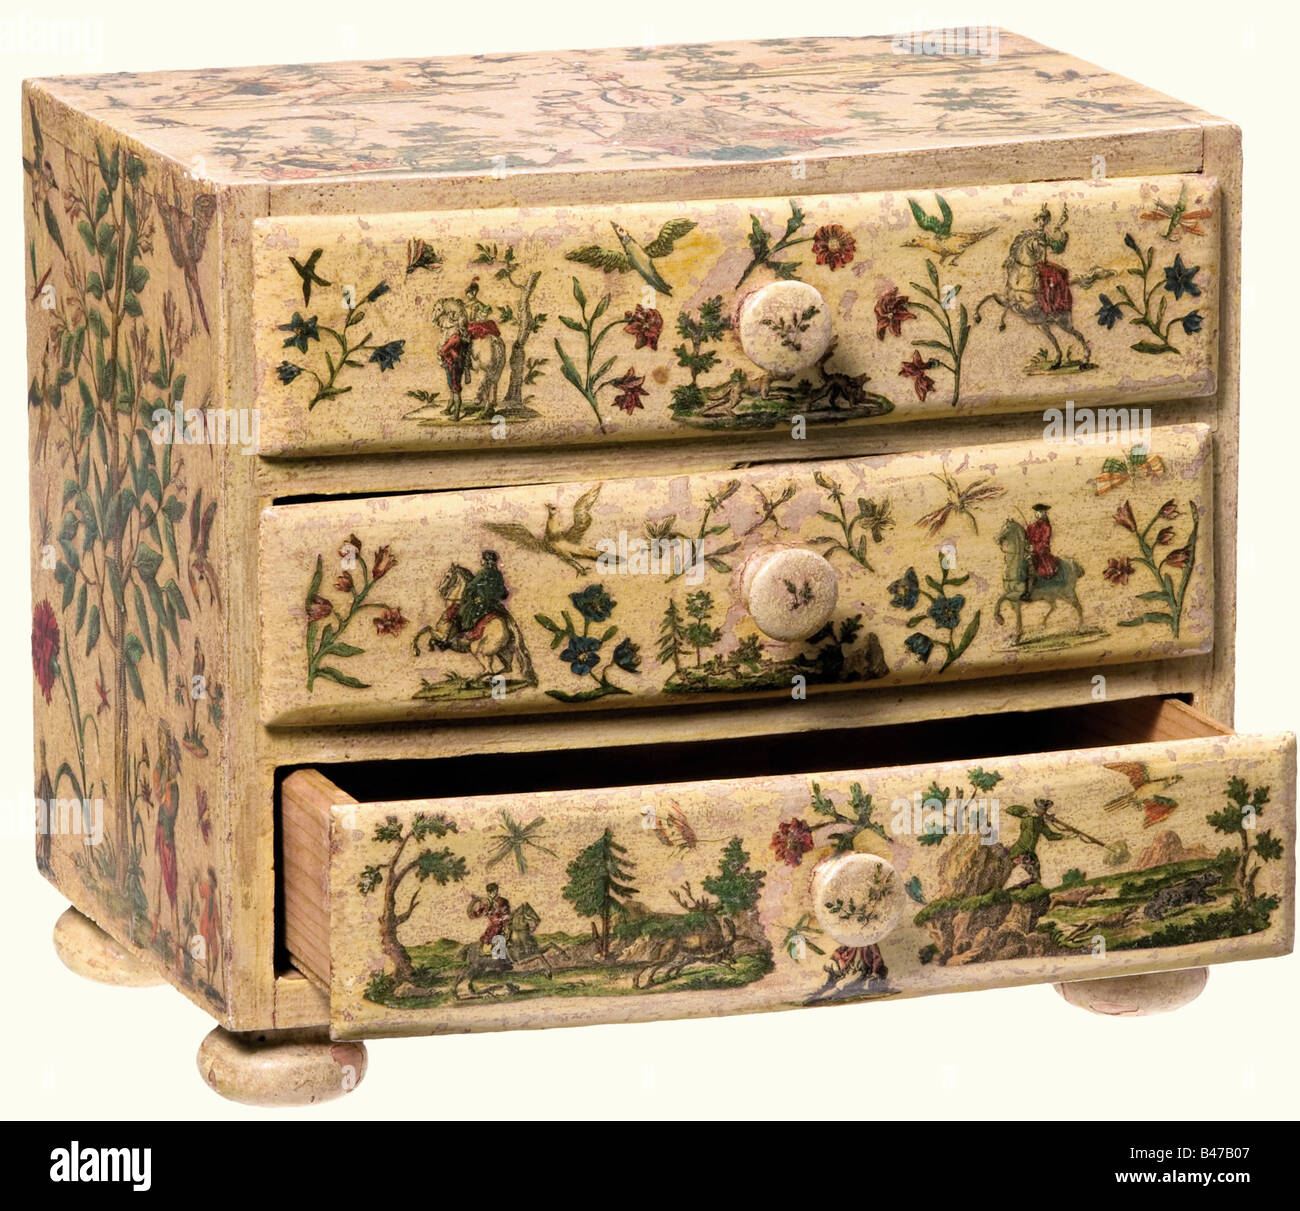 A miniature commode decorated with hunting themes, Southern German, circa 1760 A three drawer, slightly curved, soft wood commode on four compressed spherical feet. The front is painted in a cream colour and bears appliqué decoration of finely cut, coloured copperplate engraving. Surrounded with numerous hunting scenes, framed by flowers, birds, and insects. Dimensions 16.5 x 19 x 13.5 cm. historic, historical, 18th century, handicrafts, handcraft, craft, object, objects, stills, clipping, clippings, cut out, cut-out, cut-outs, storage, box, boxes, cabinet, che, Stock Photo